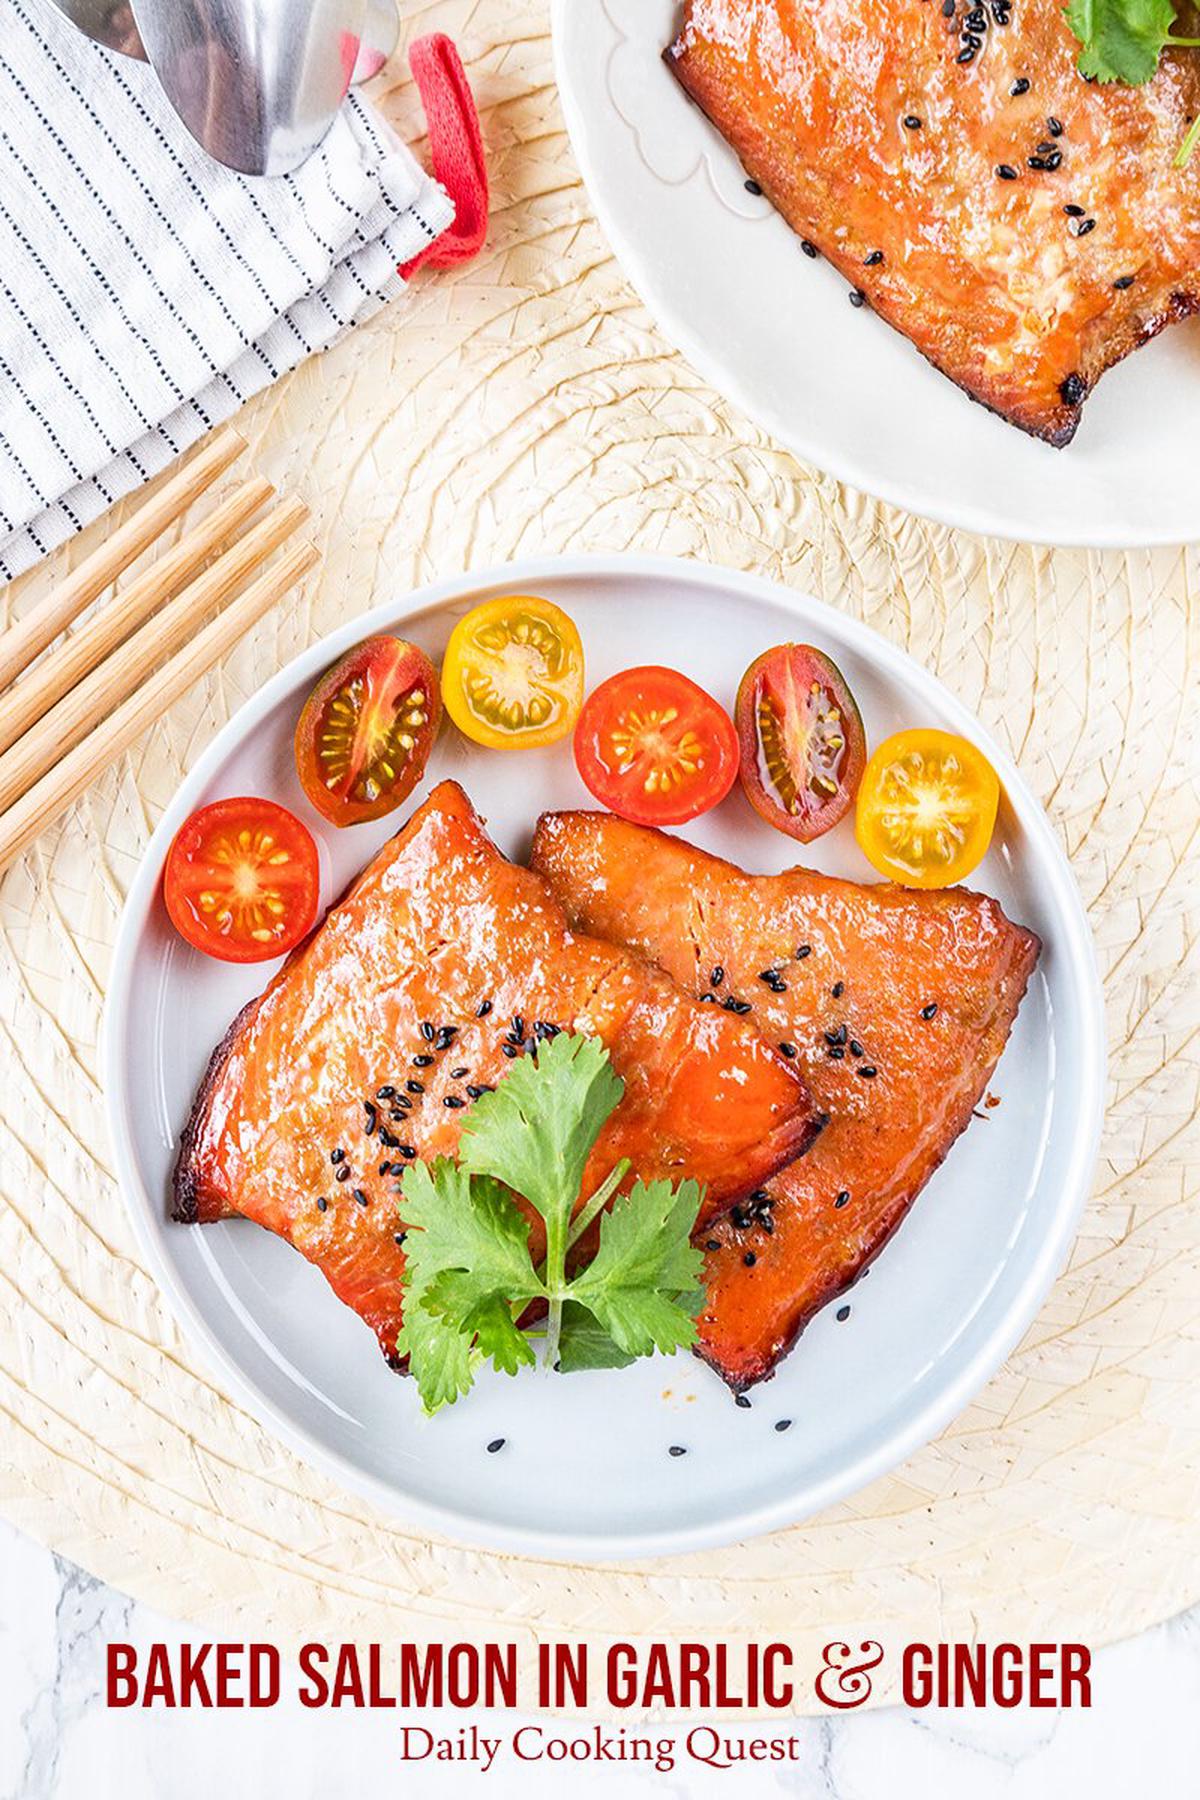 Baked salmon in garlic and ginger, garnished with sesame seeds, and served with cherry tomatoes.